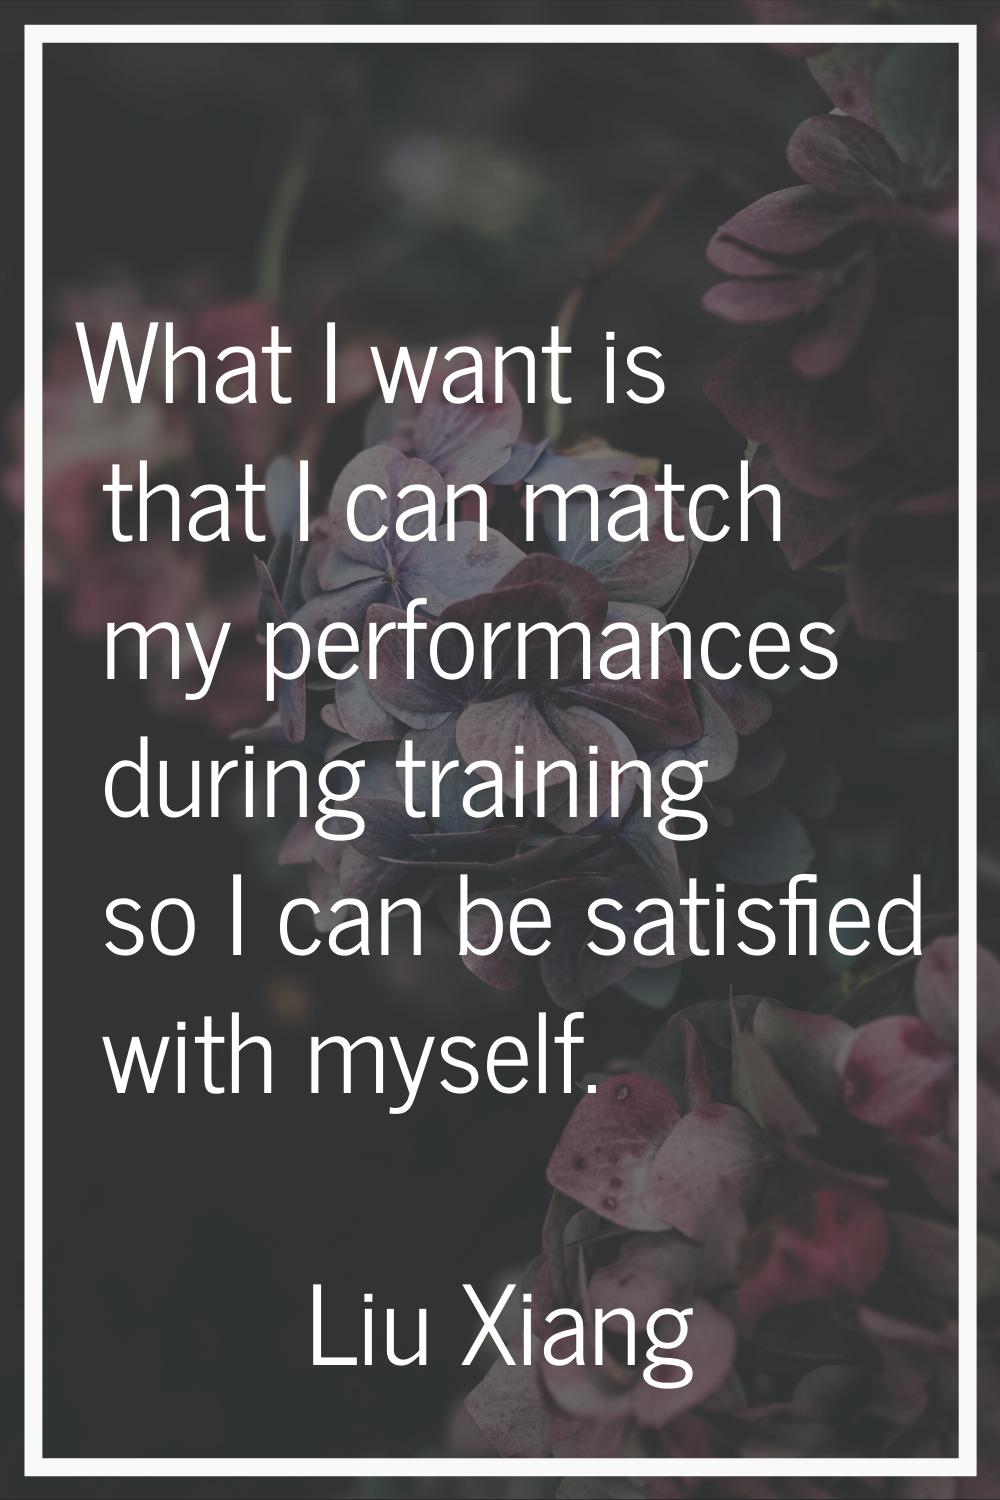 What I want is that I can match my performances during training so I can be satisfied with myself.